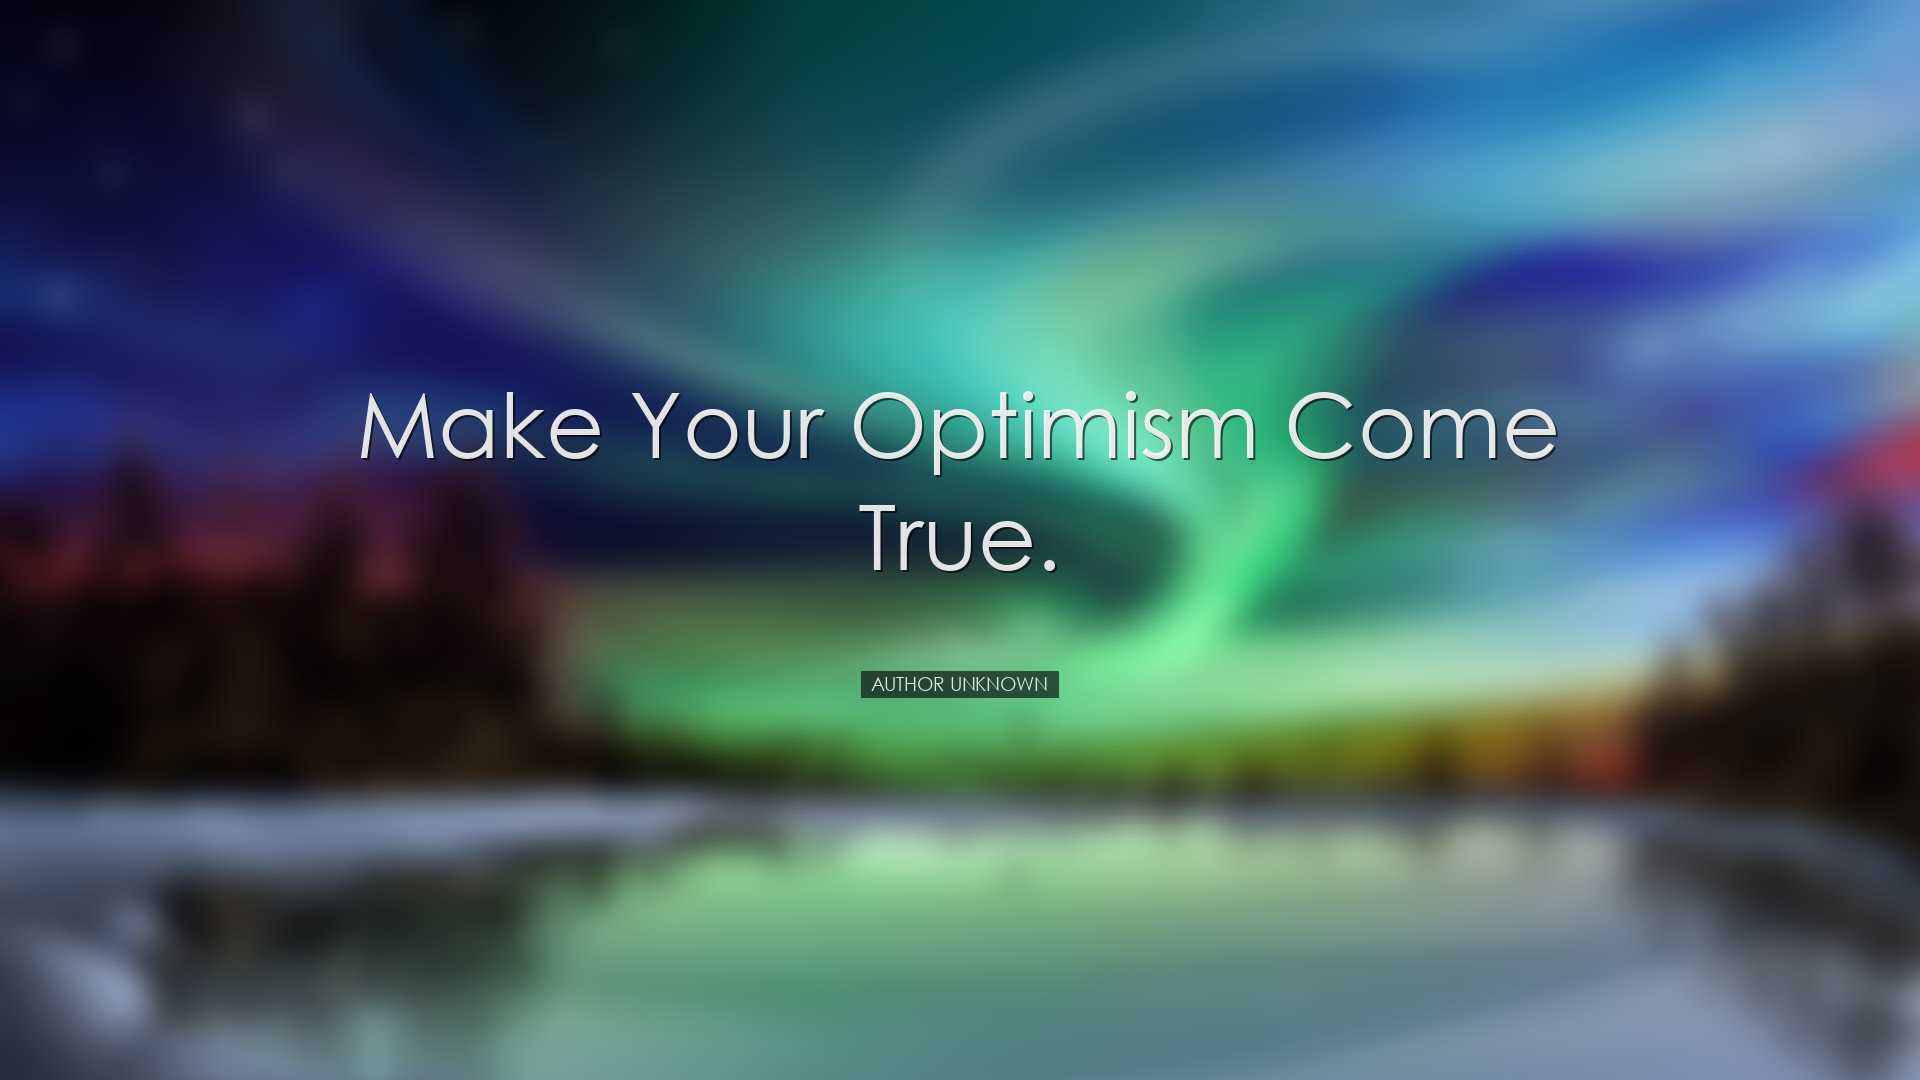 Make your optimism come true. - Author Unknown